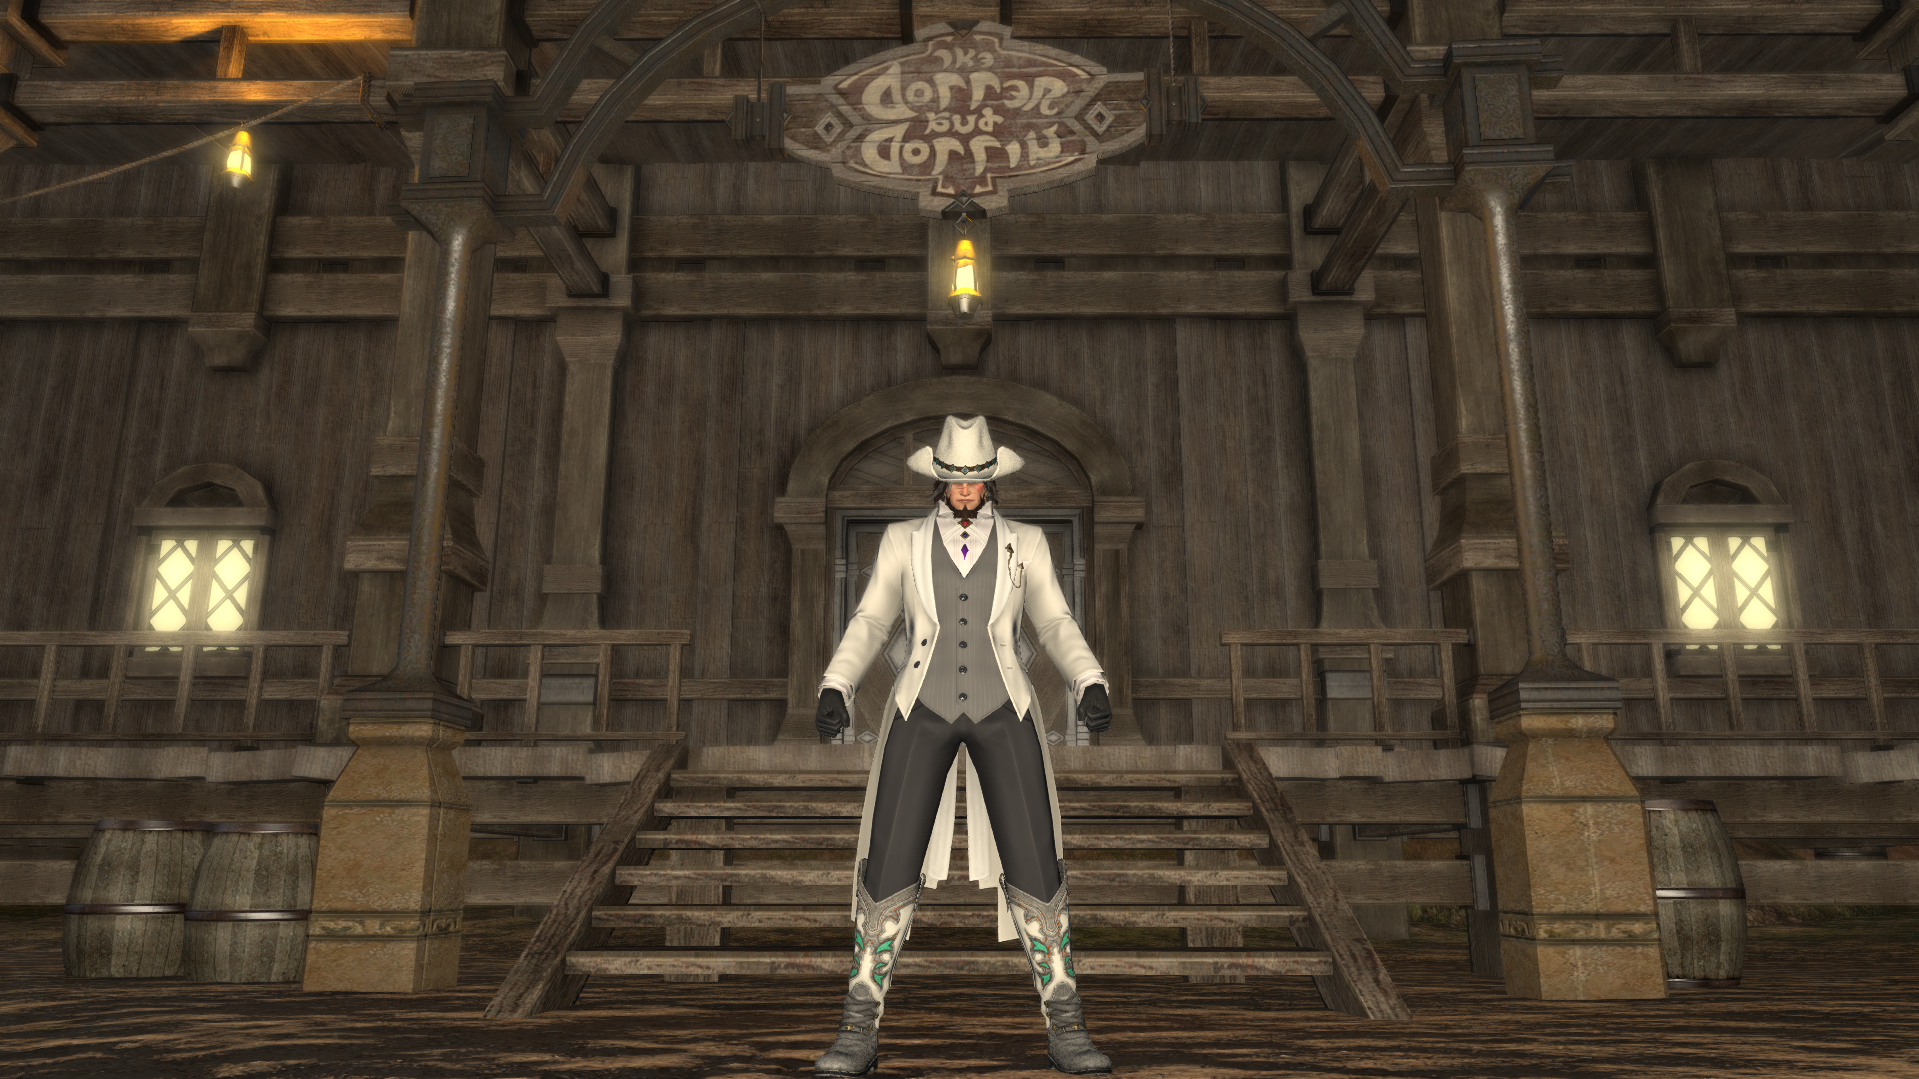 The Pale Rider